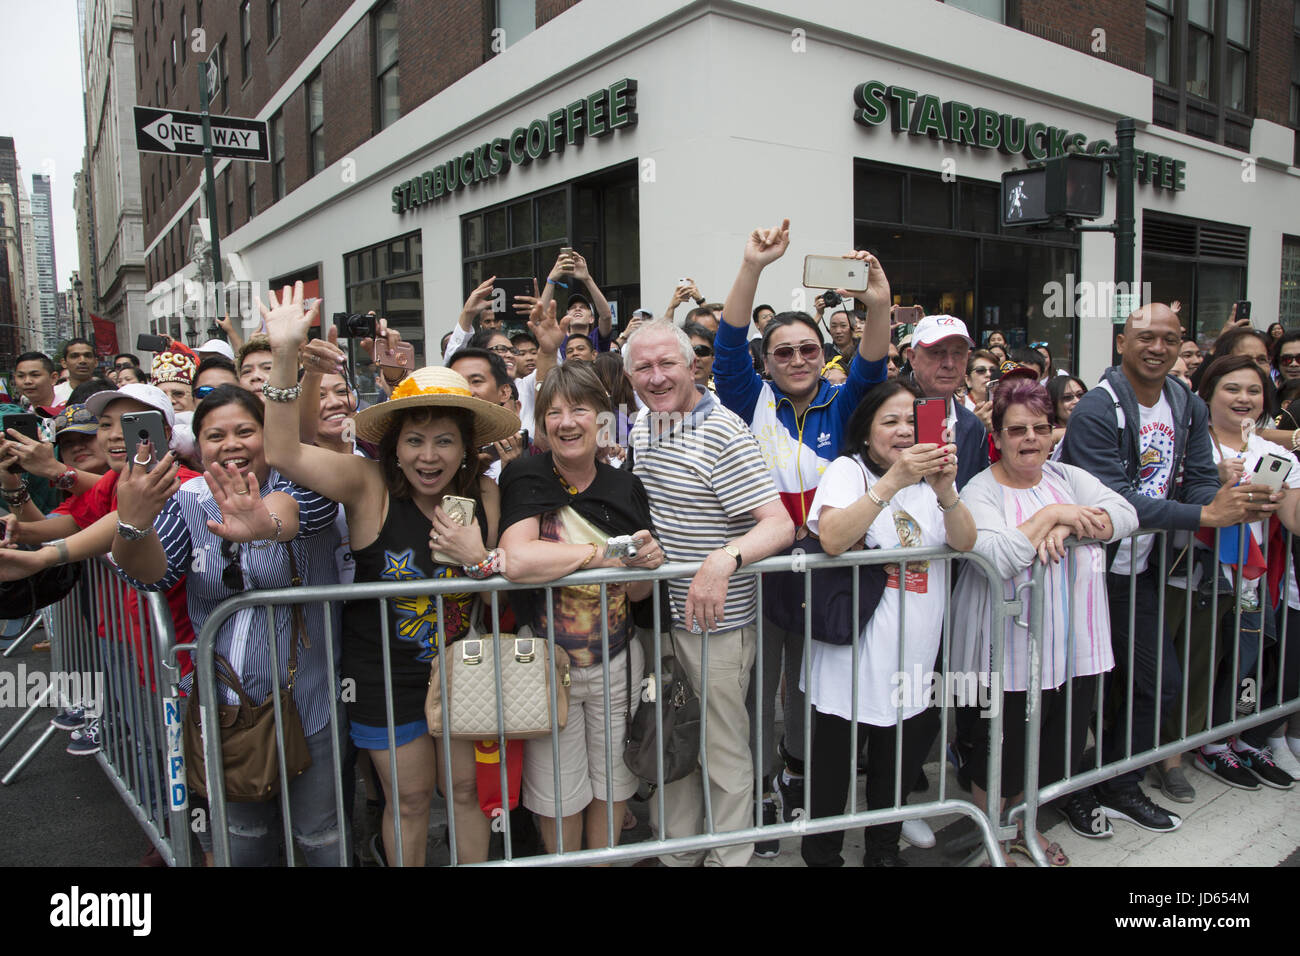 Philippine Independence Day Parade along Madison Avenue in New York City. Filipino American spectators at the parade. Stock Photo